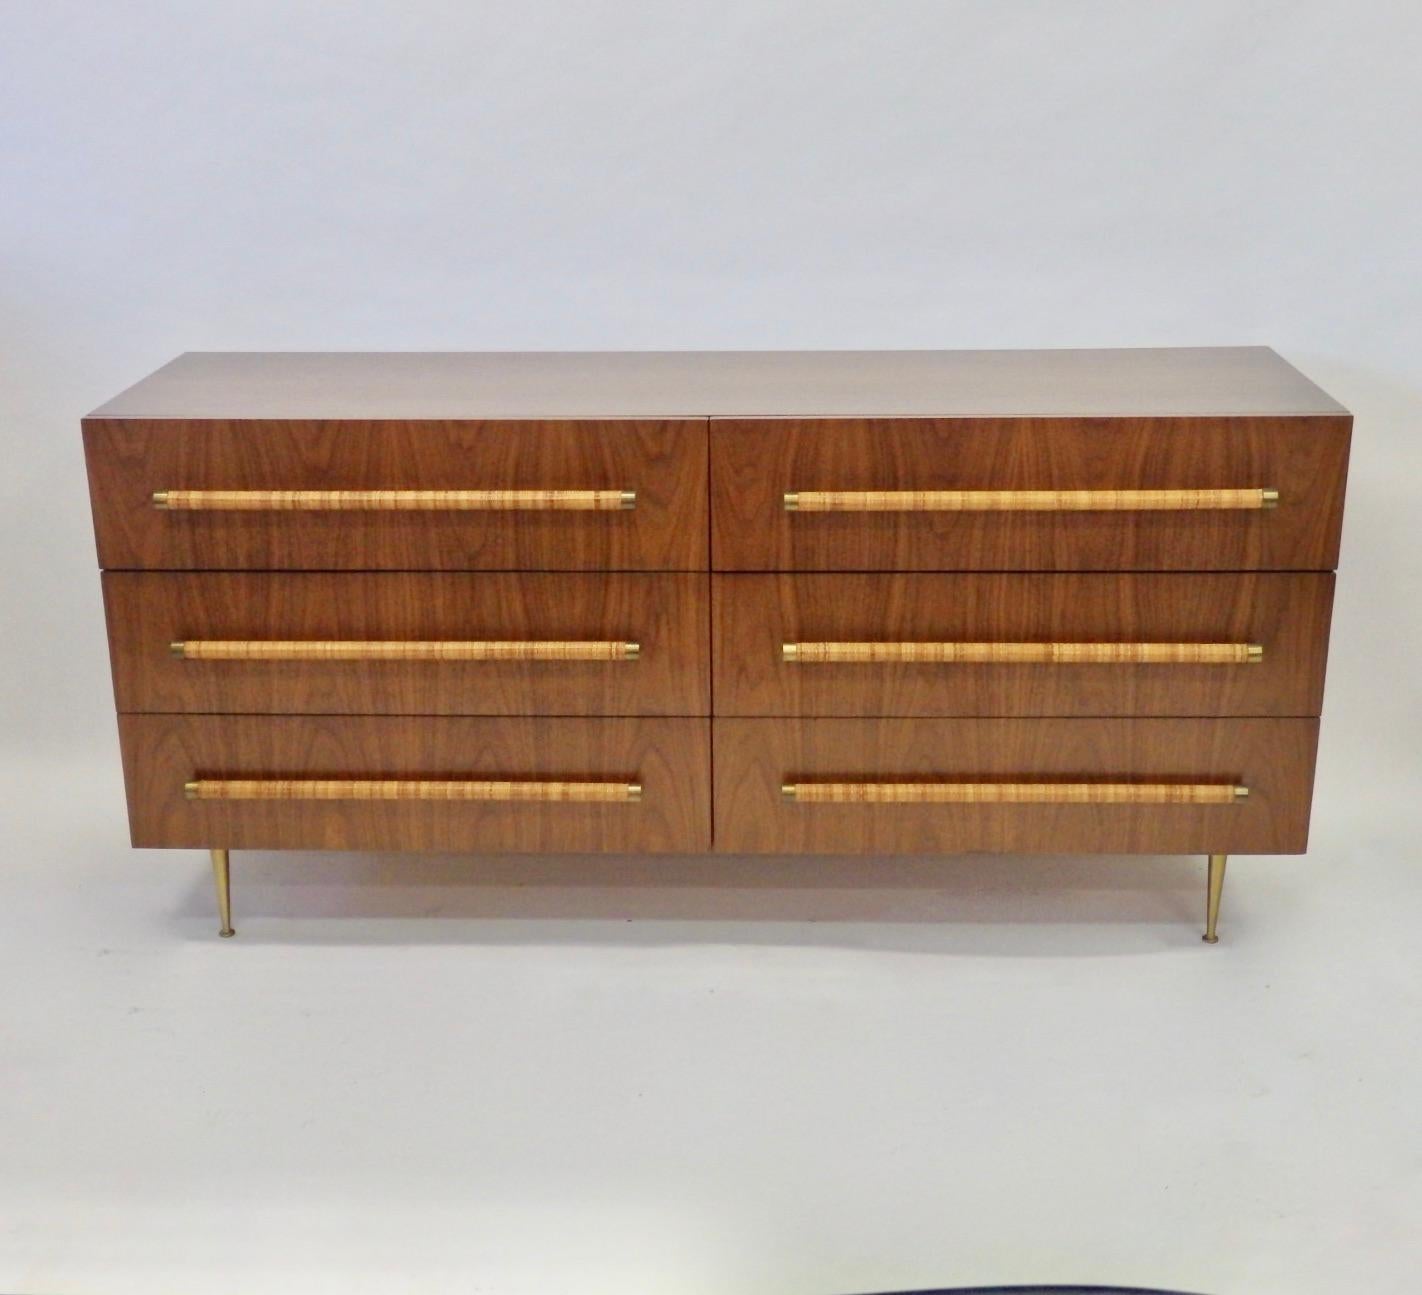 20th Century TH Robsjohn Gibbings Double Dresser with Raffia Wrapped Pulls and Brass Legs